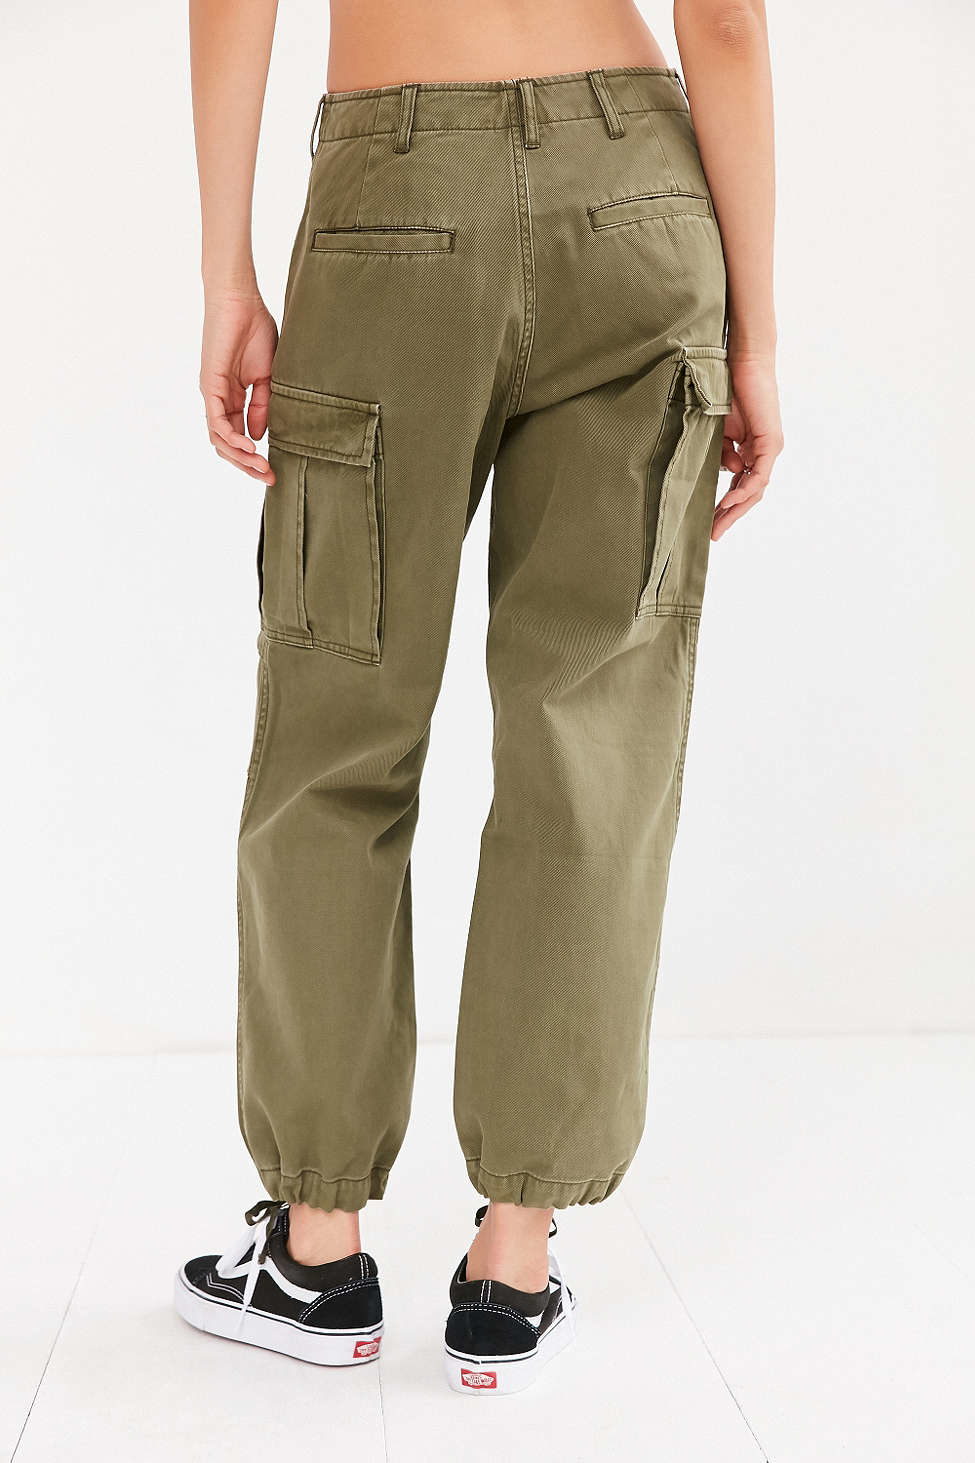 Lyst - Bdg Utility Cargo Pant in Green